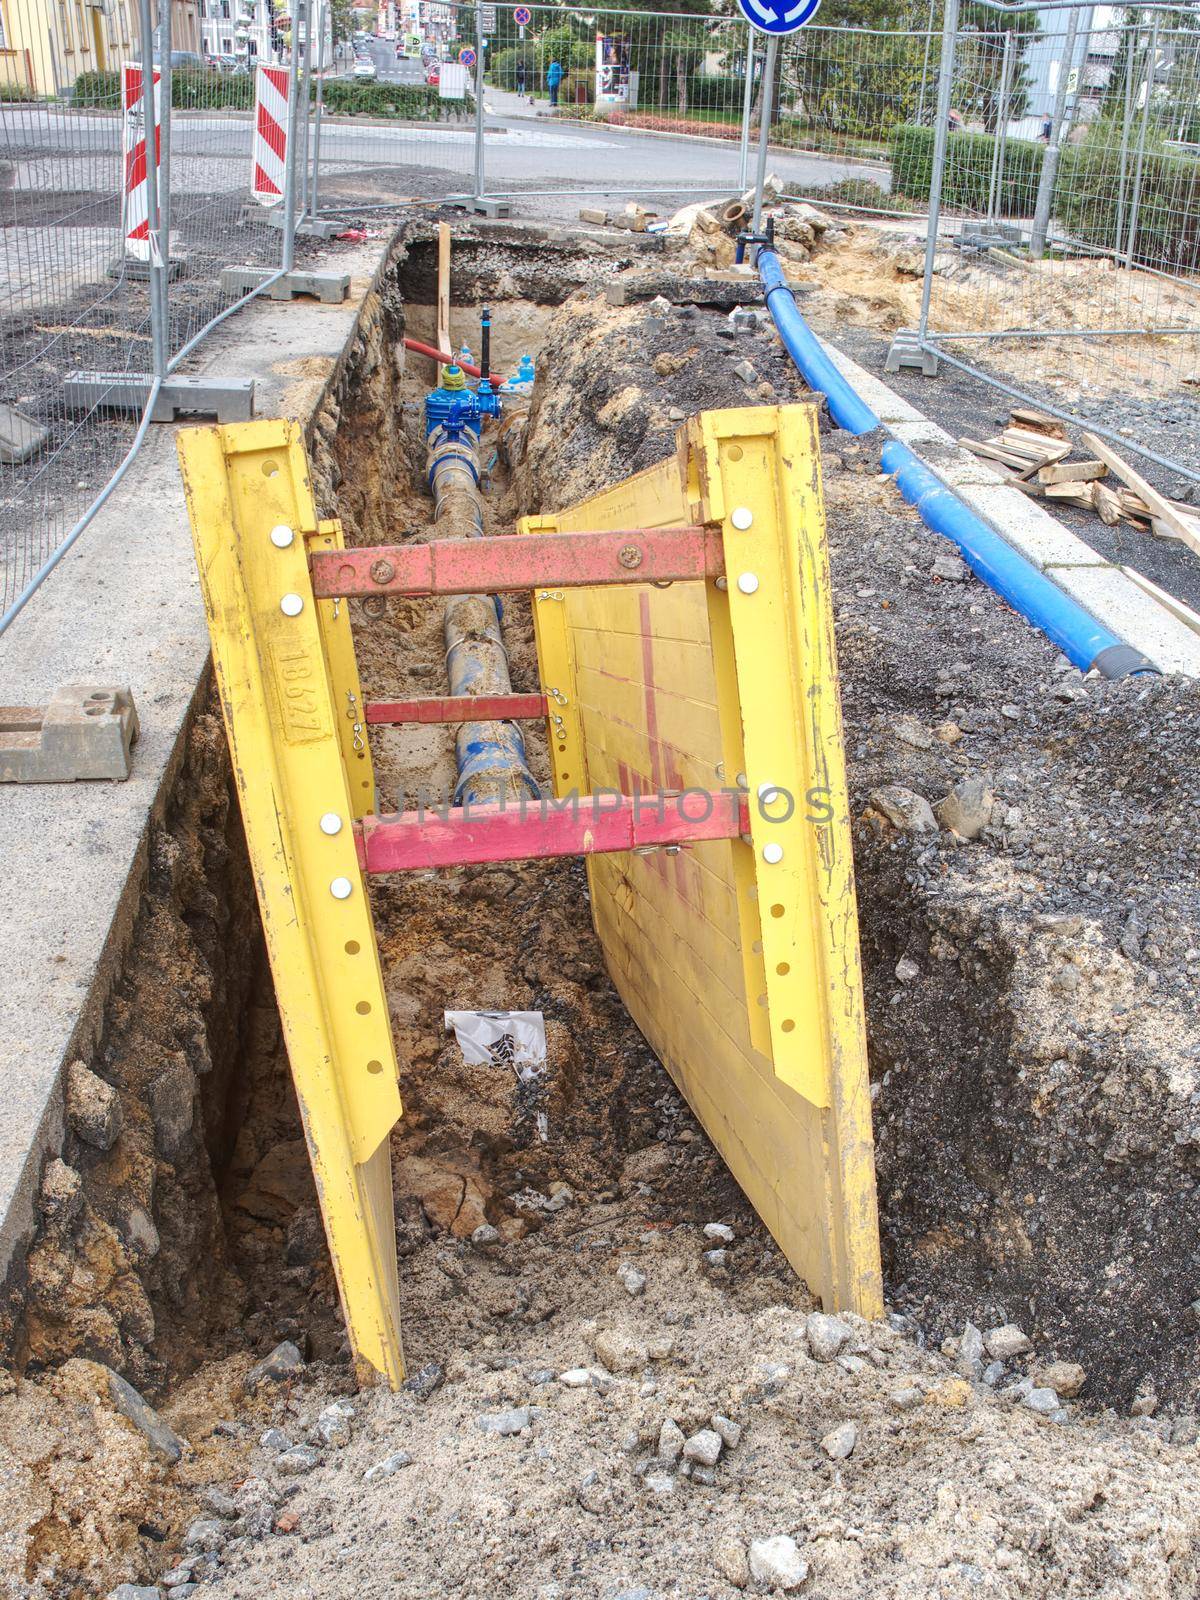 Flat steel formwork concrete strip foundation for water inspection shaft under street pavement. Complete rebuilding water system from steel to plastic tube